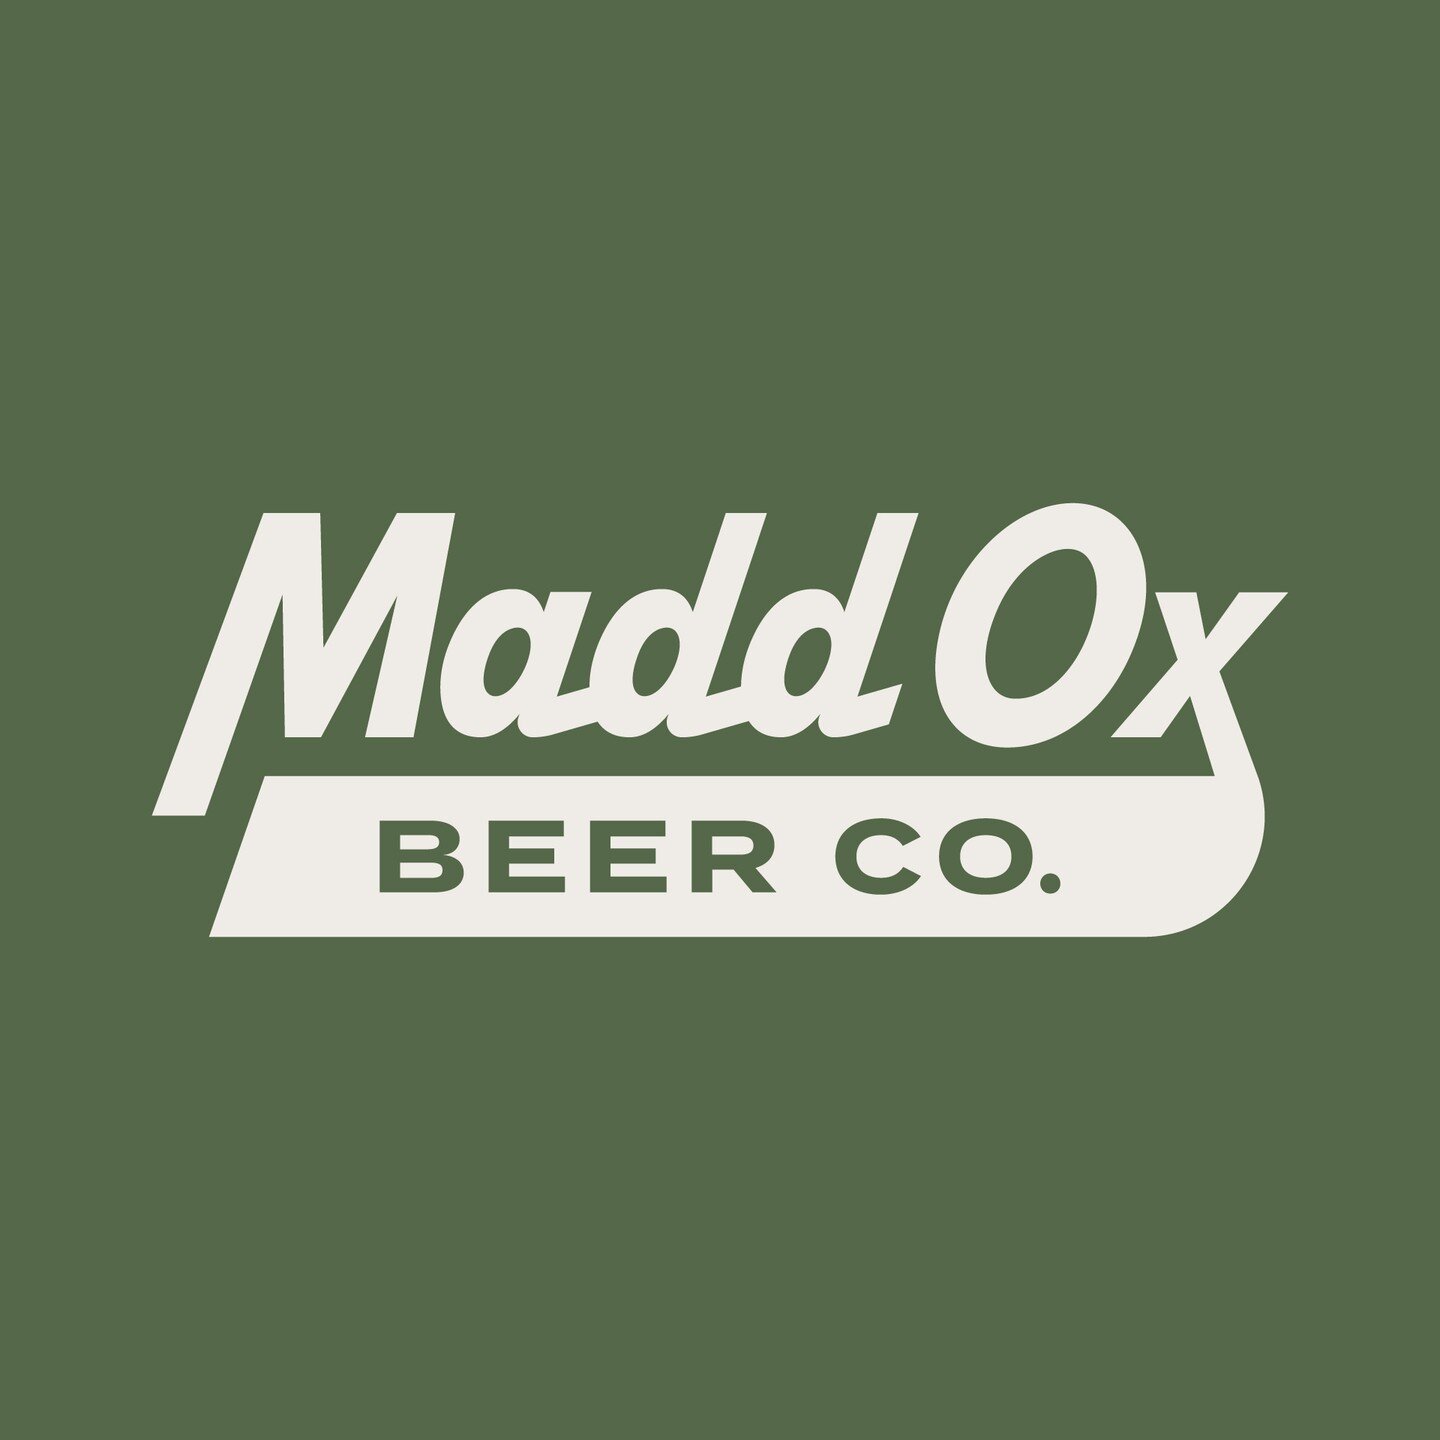 New branding and graphics for our friends @maddoxbeerco, a new brewery coming to North Carolina. 

The identity takes its name from the owners son, Maddox, and a love for Scotland and Highland Cows (which the property will have living on-site!). We p